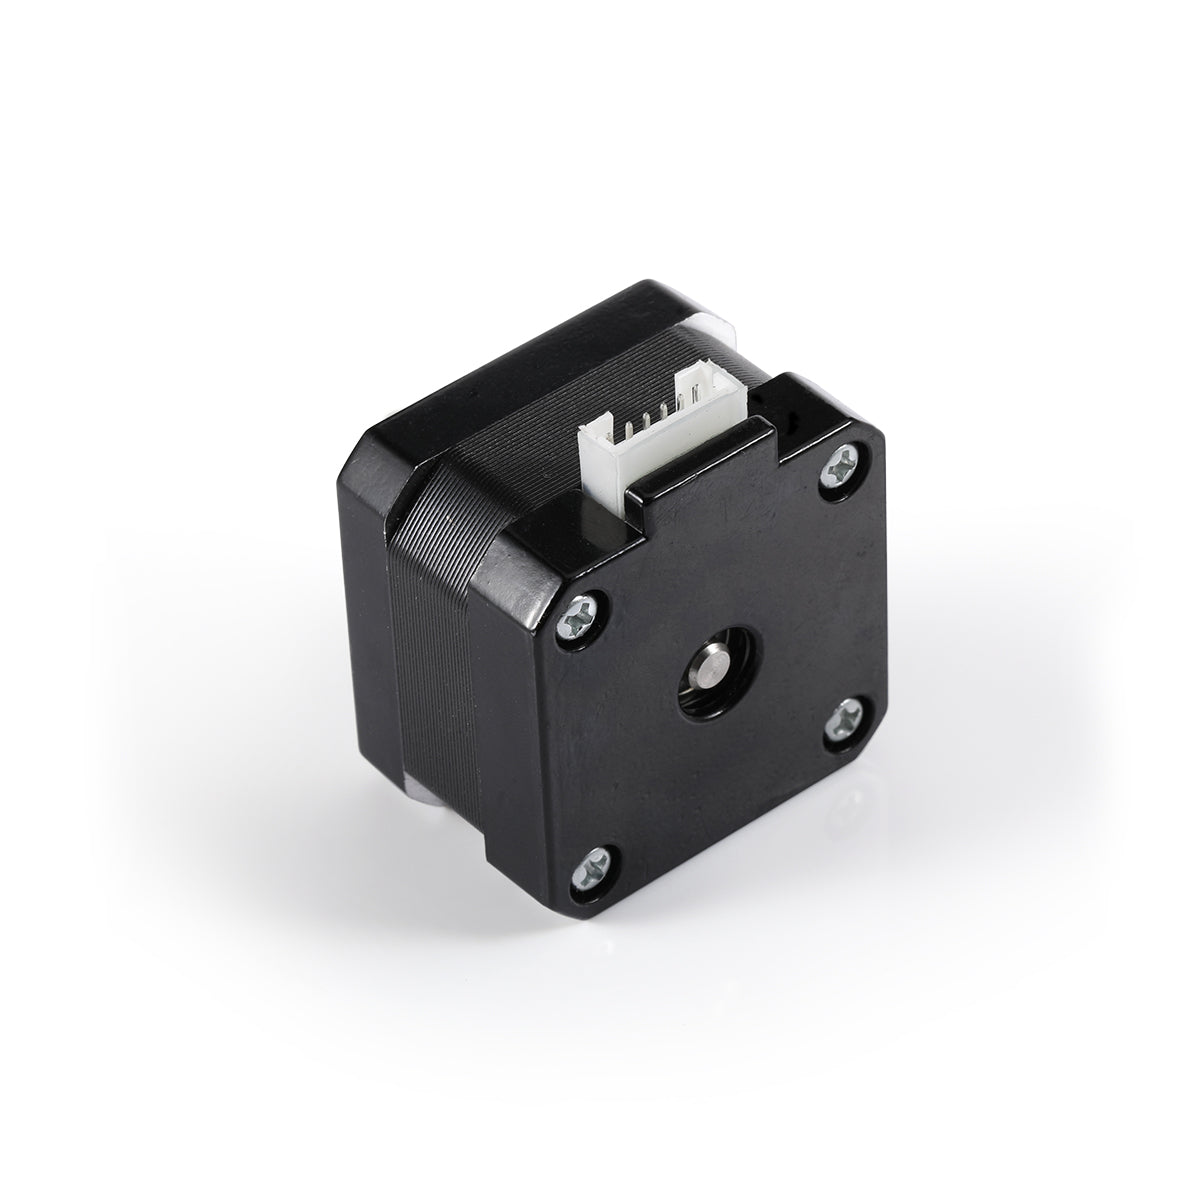 REPLACEMENT STEPPER MOTOR FOR NEJE MAX 810X460MM LASER ENGRAVER